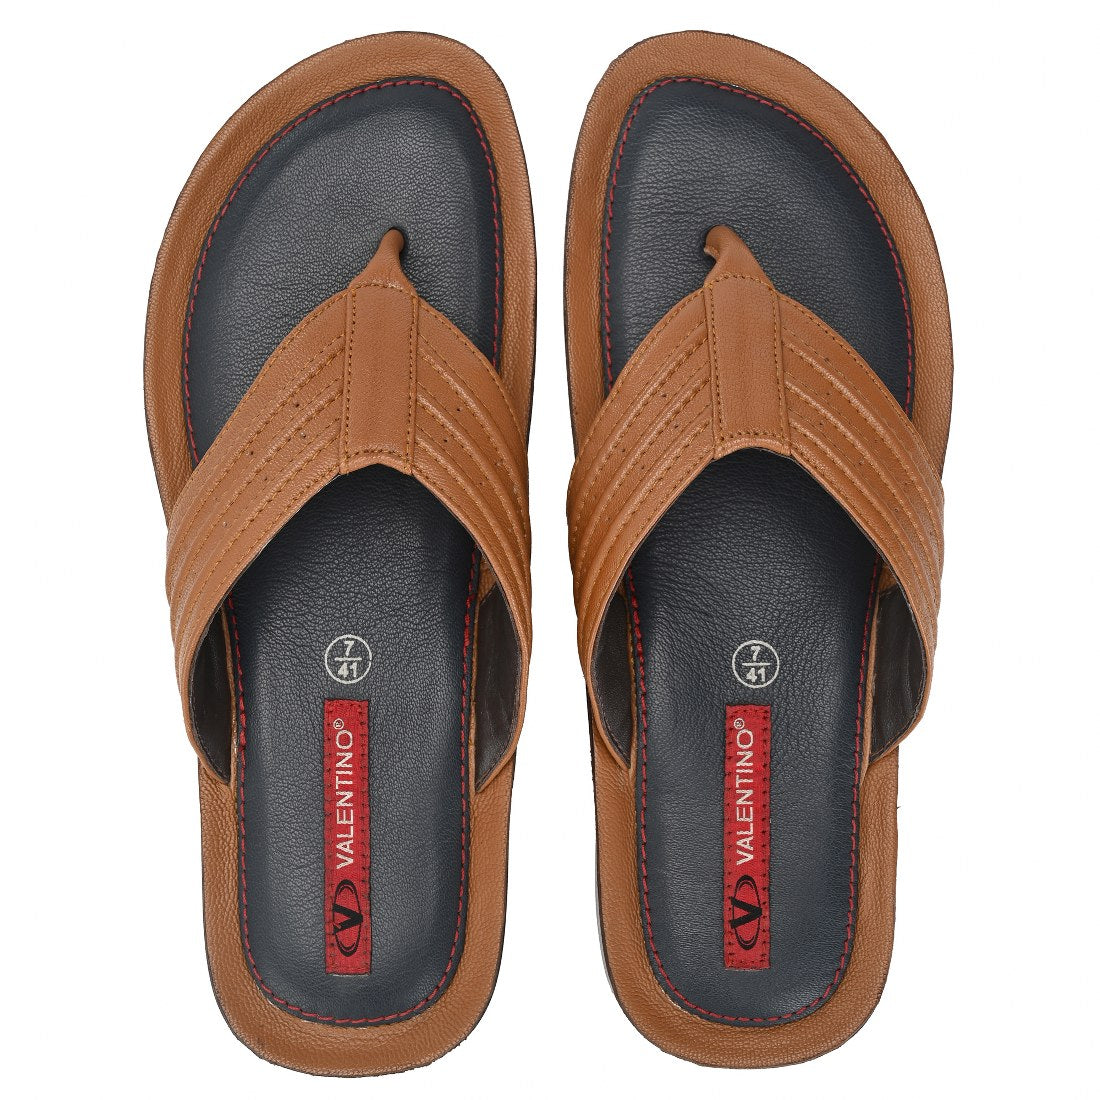 CHILL OUT-20 MEN LEATHER TAN CASUAL SLIPPER V-STRAP